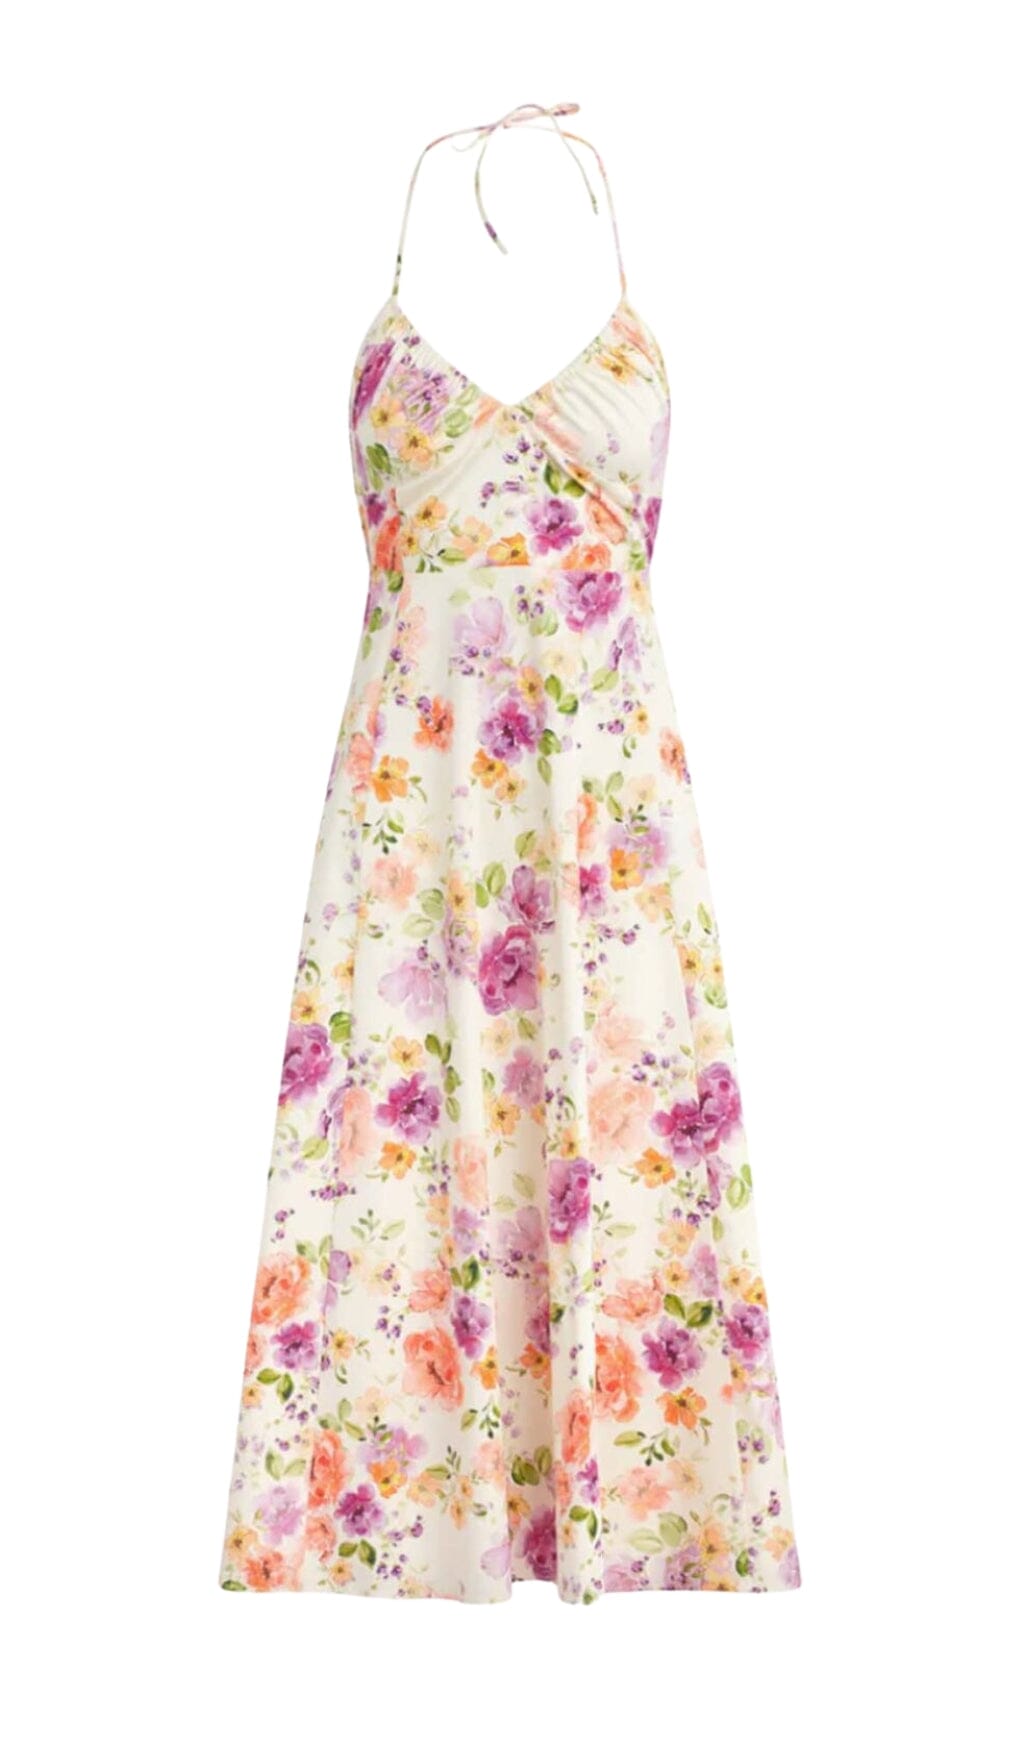 FLORAL HALTER MIDI DRESS IN PINK - STYLE OF CB - PARTY WEAR DRESS ...